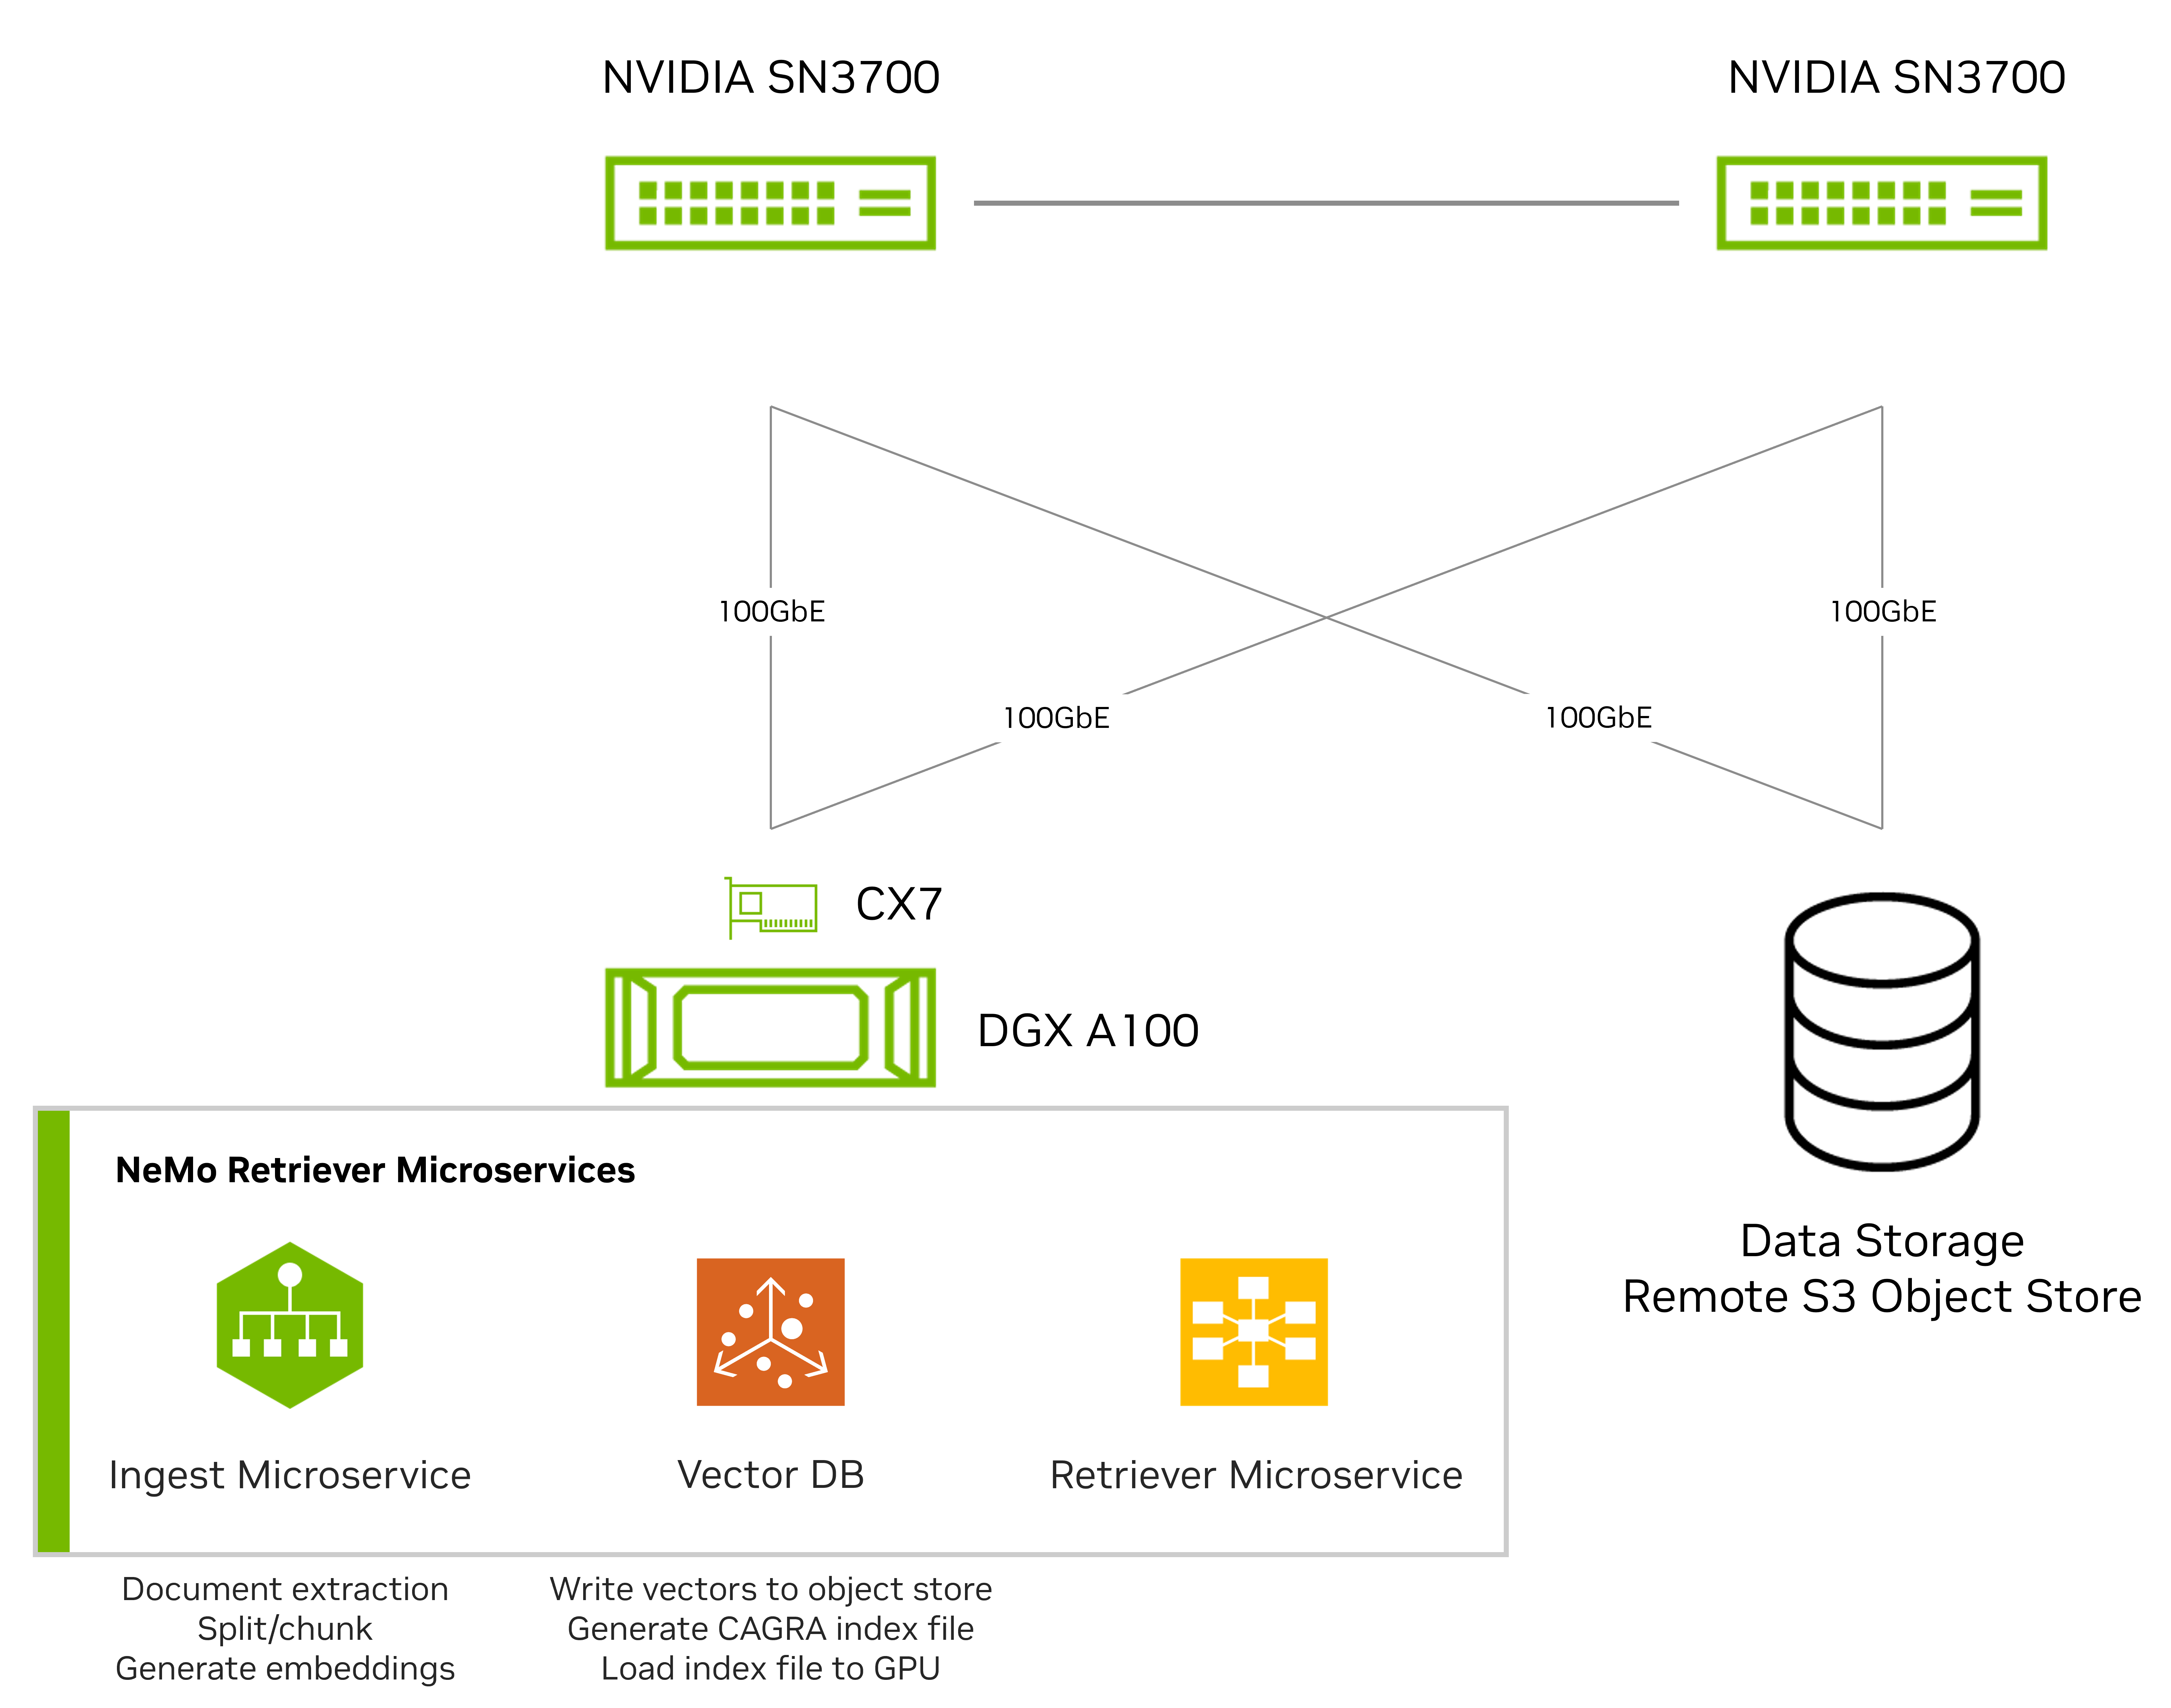 Diagram shows the test setup for data ingestion using a single DGX system and a networked storage platform, connected via NVMe-over-Fabrics using NVIDIA-accelerated Ethernet networking.